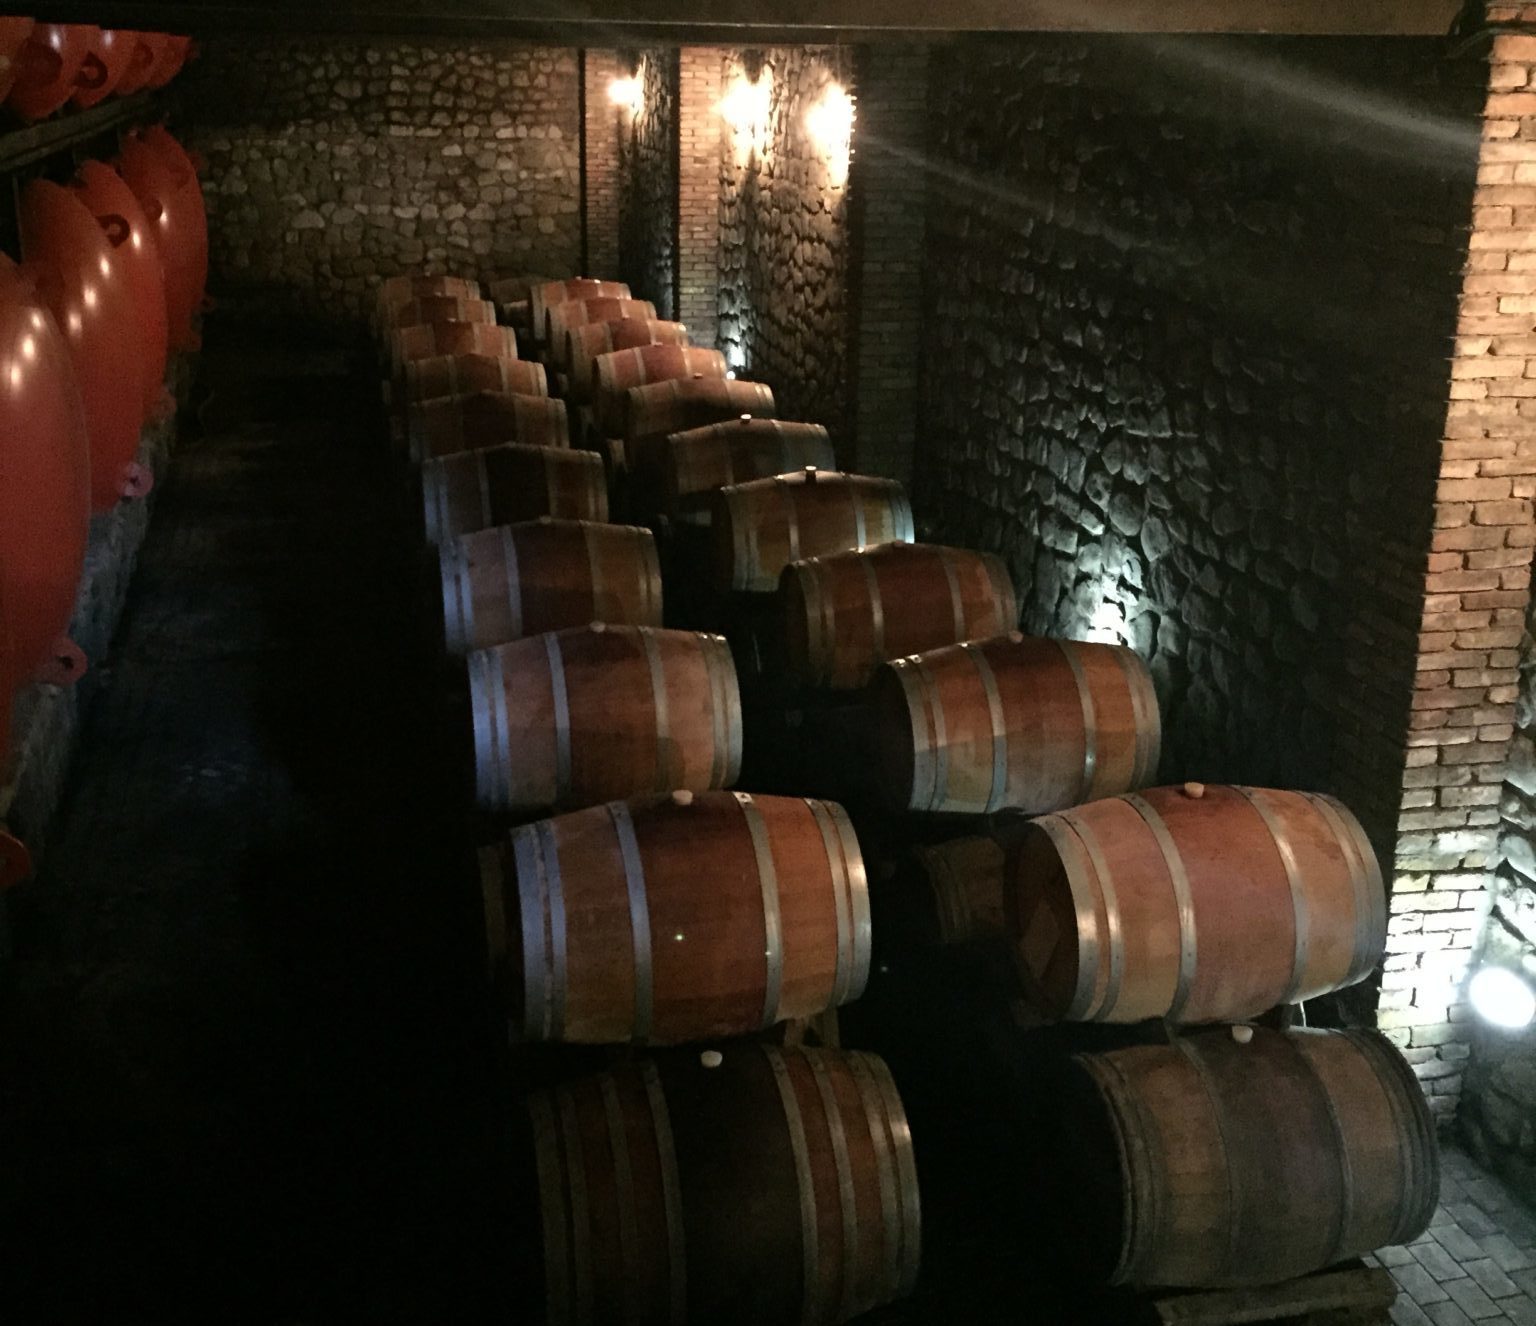 a group of barrels in a dark room